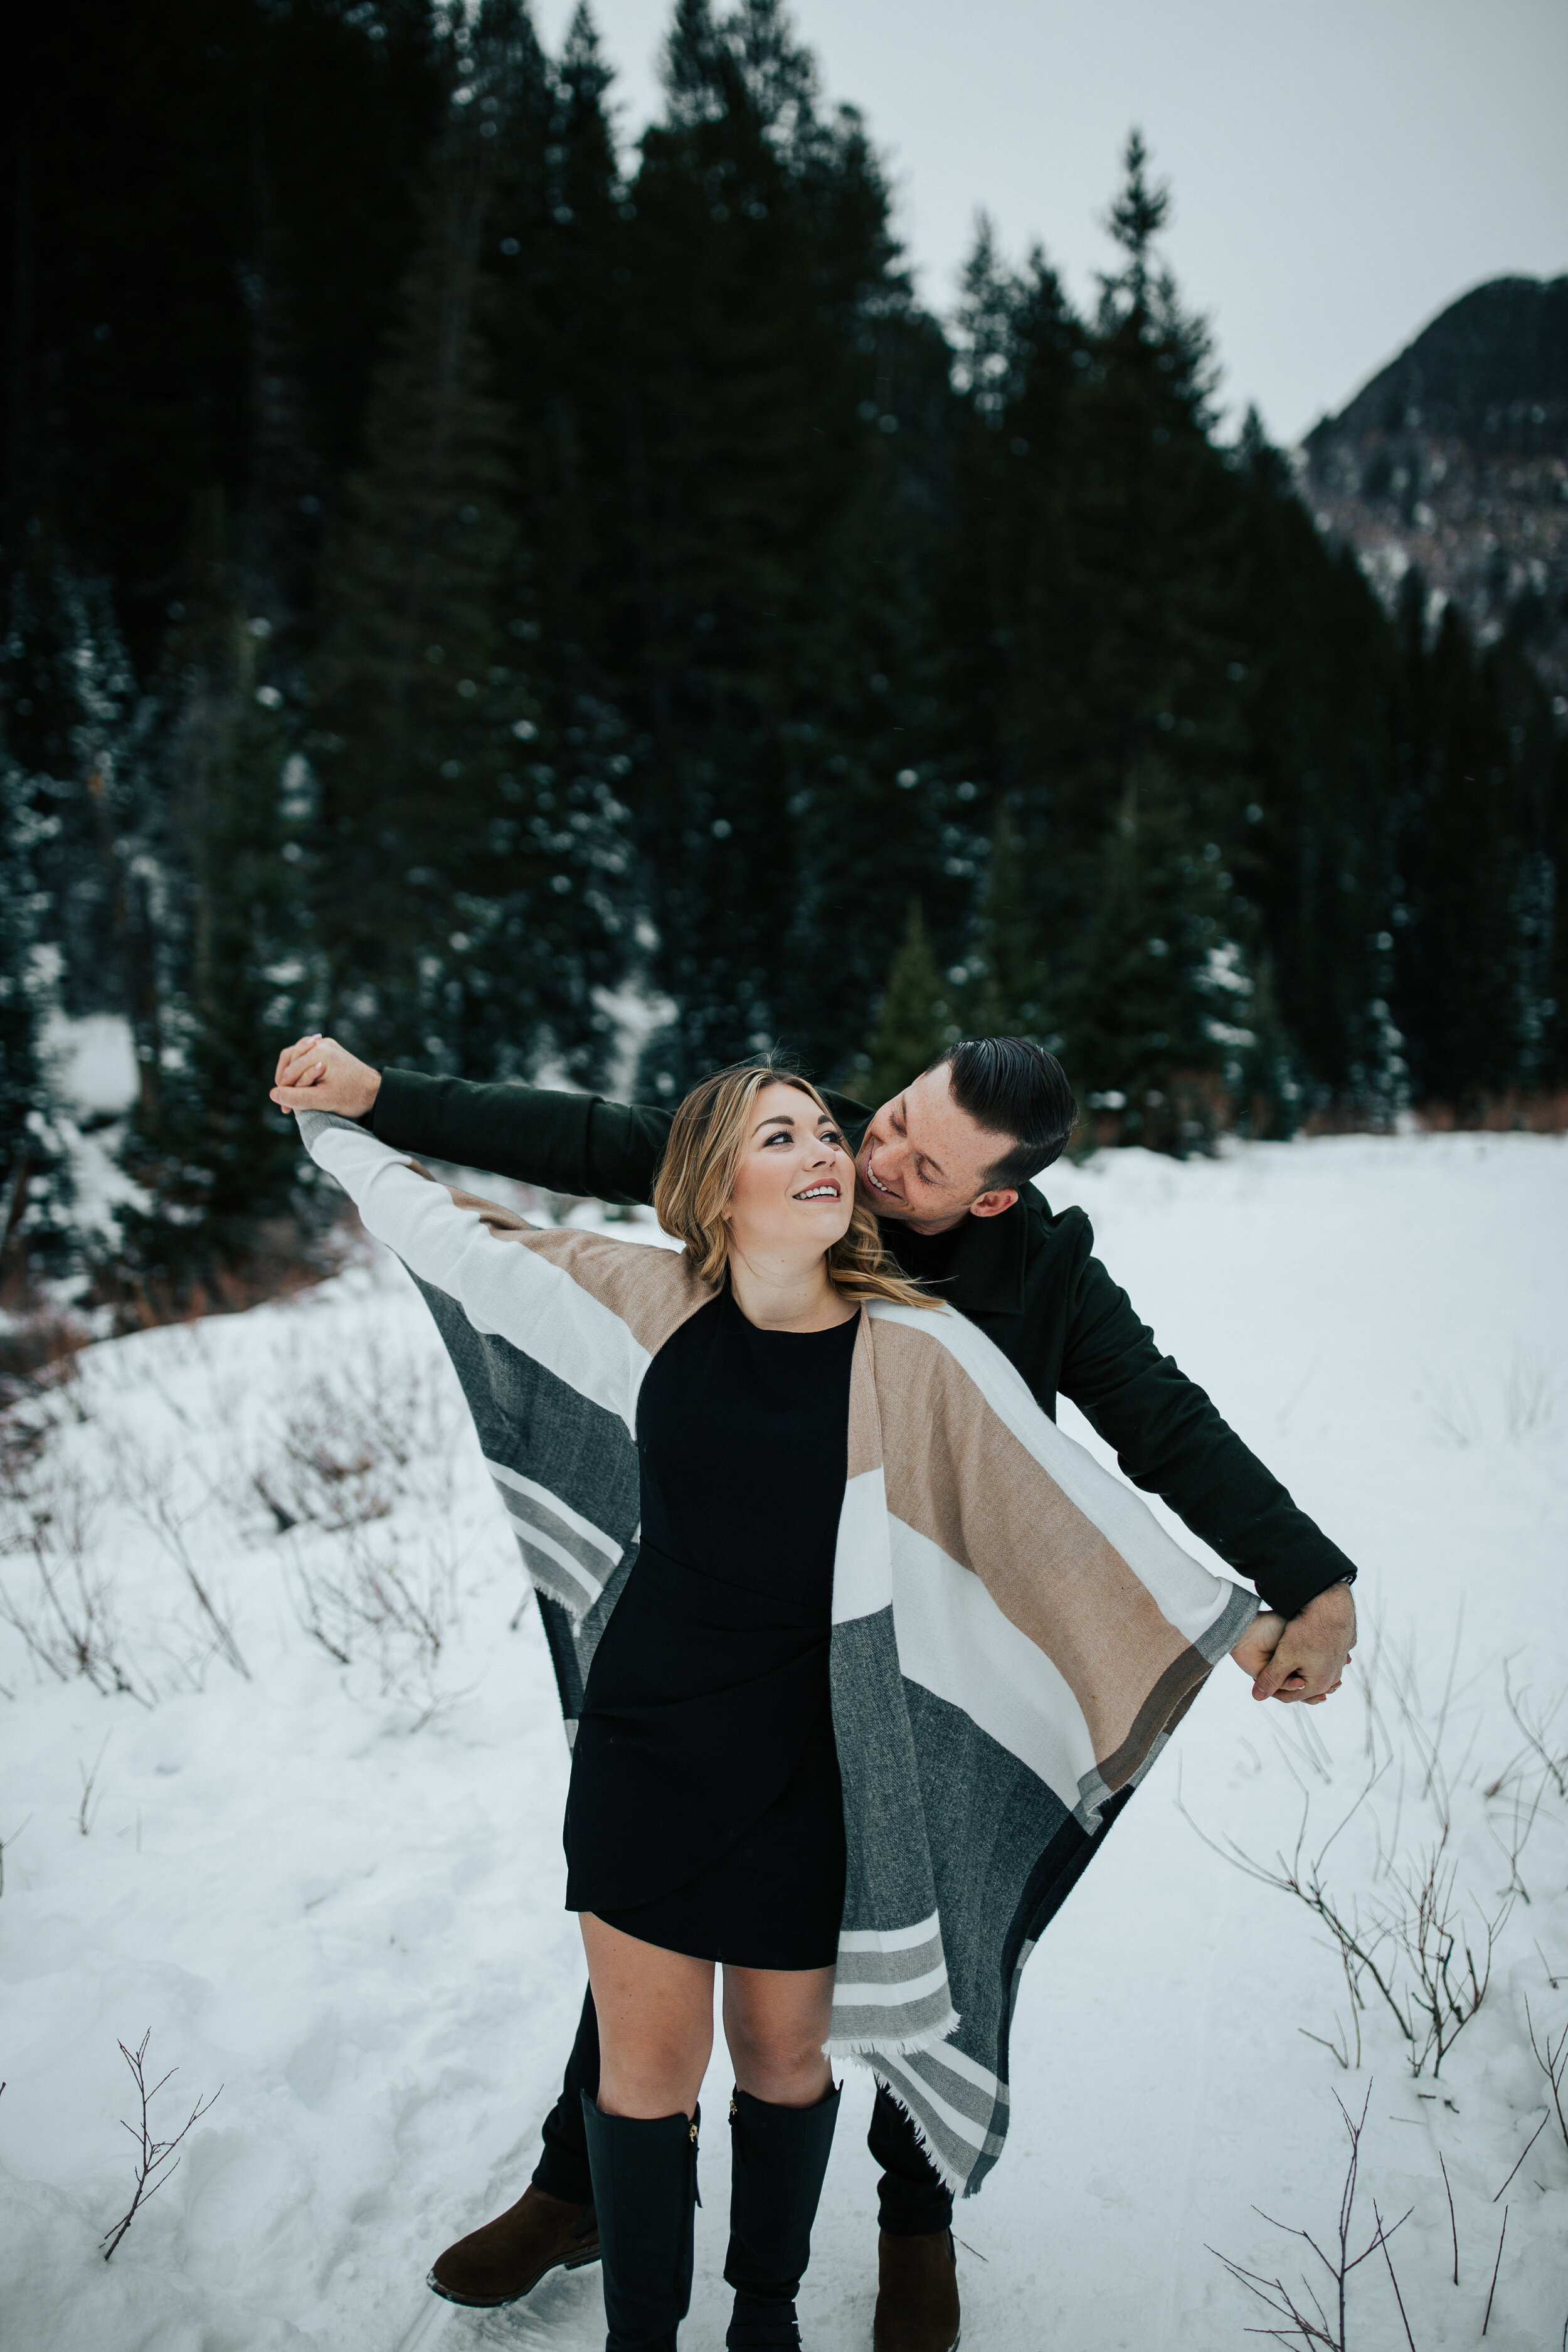 Park City Utah winter engagement shoot engaged couple photoshoot in the Utah mountains in the winter #utahphotographer #utahengagements #engagements